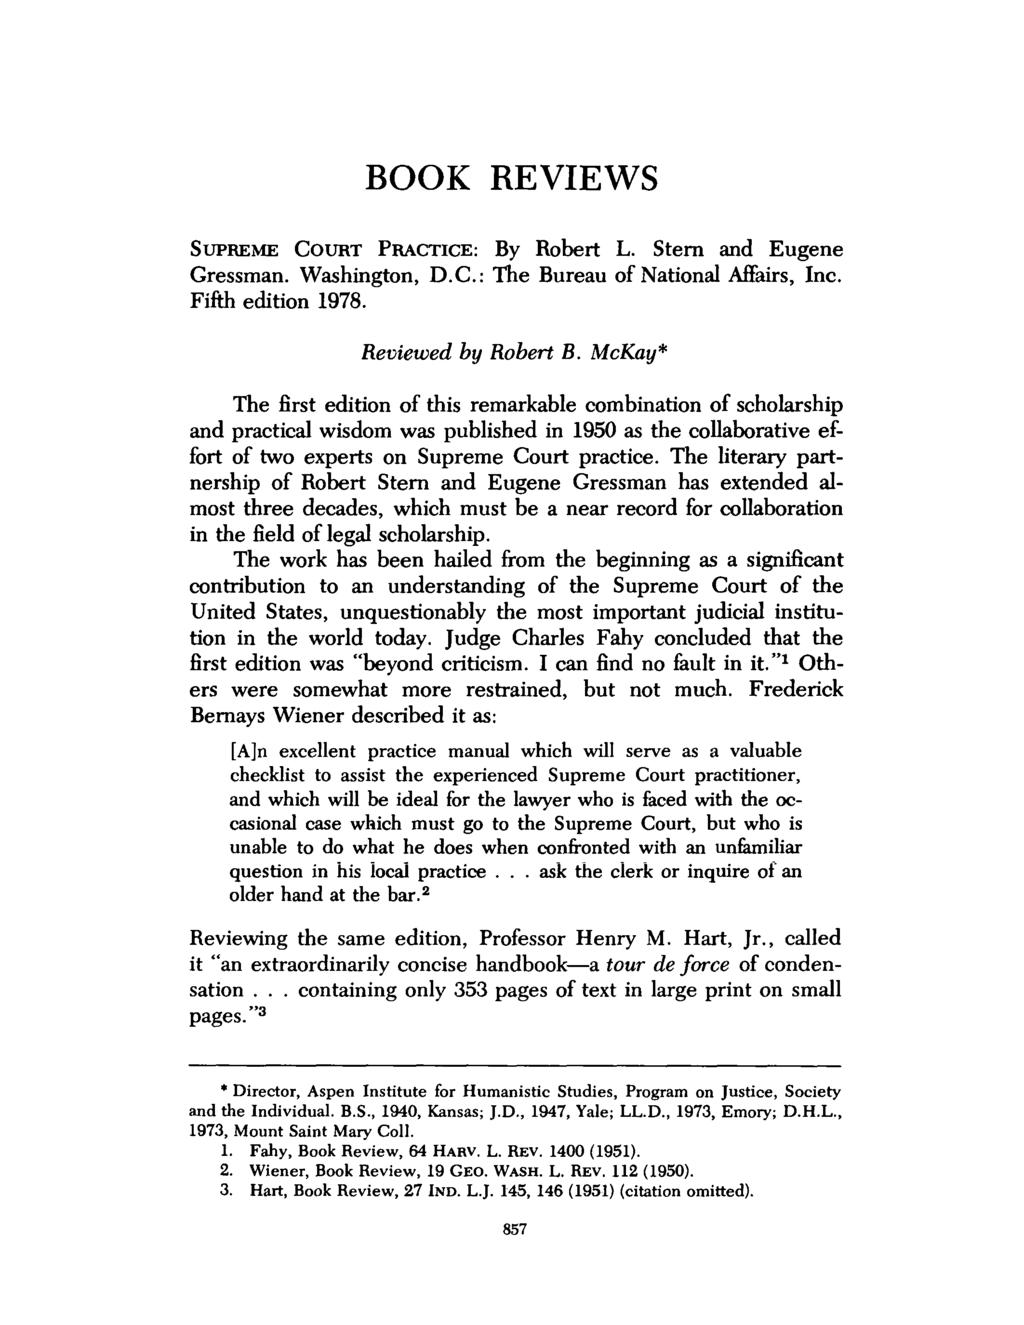 BOOK REVIEWS SUPREME COURT PRACTICE: By Robert L. Stem and Eugene Gressman. Washington, D.C.: The Bureau of National Affairs, Inc. Fifth edition 1978. Reviewed by Robert B.